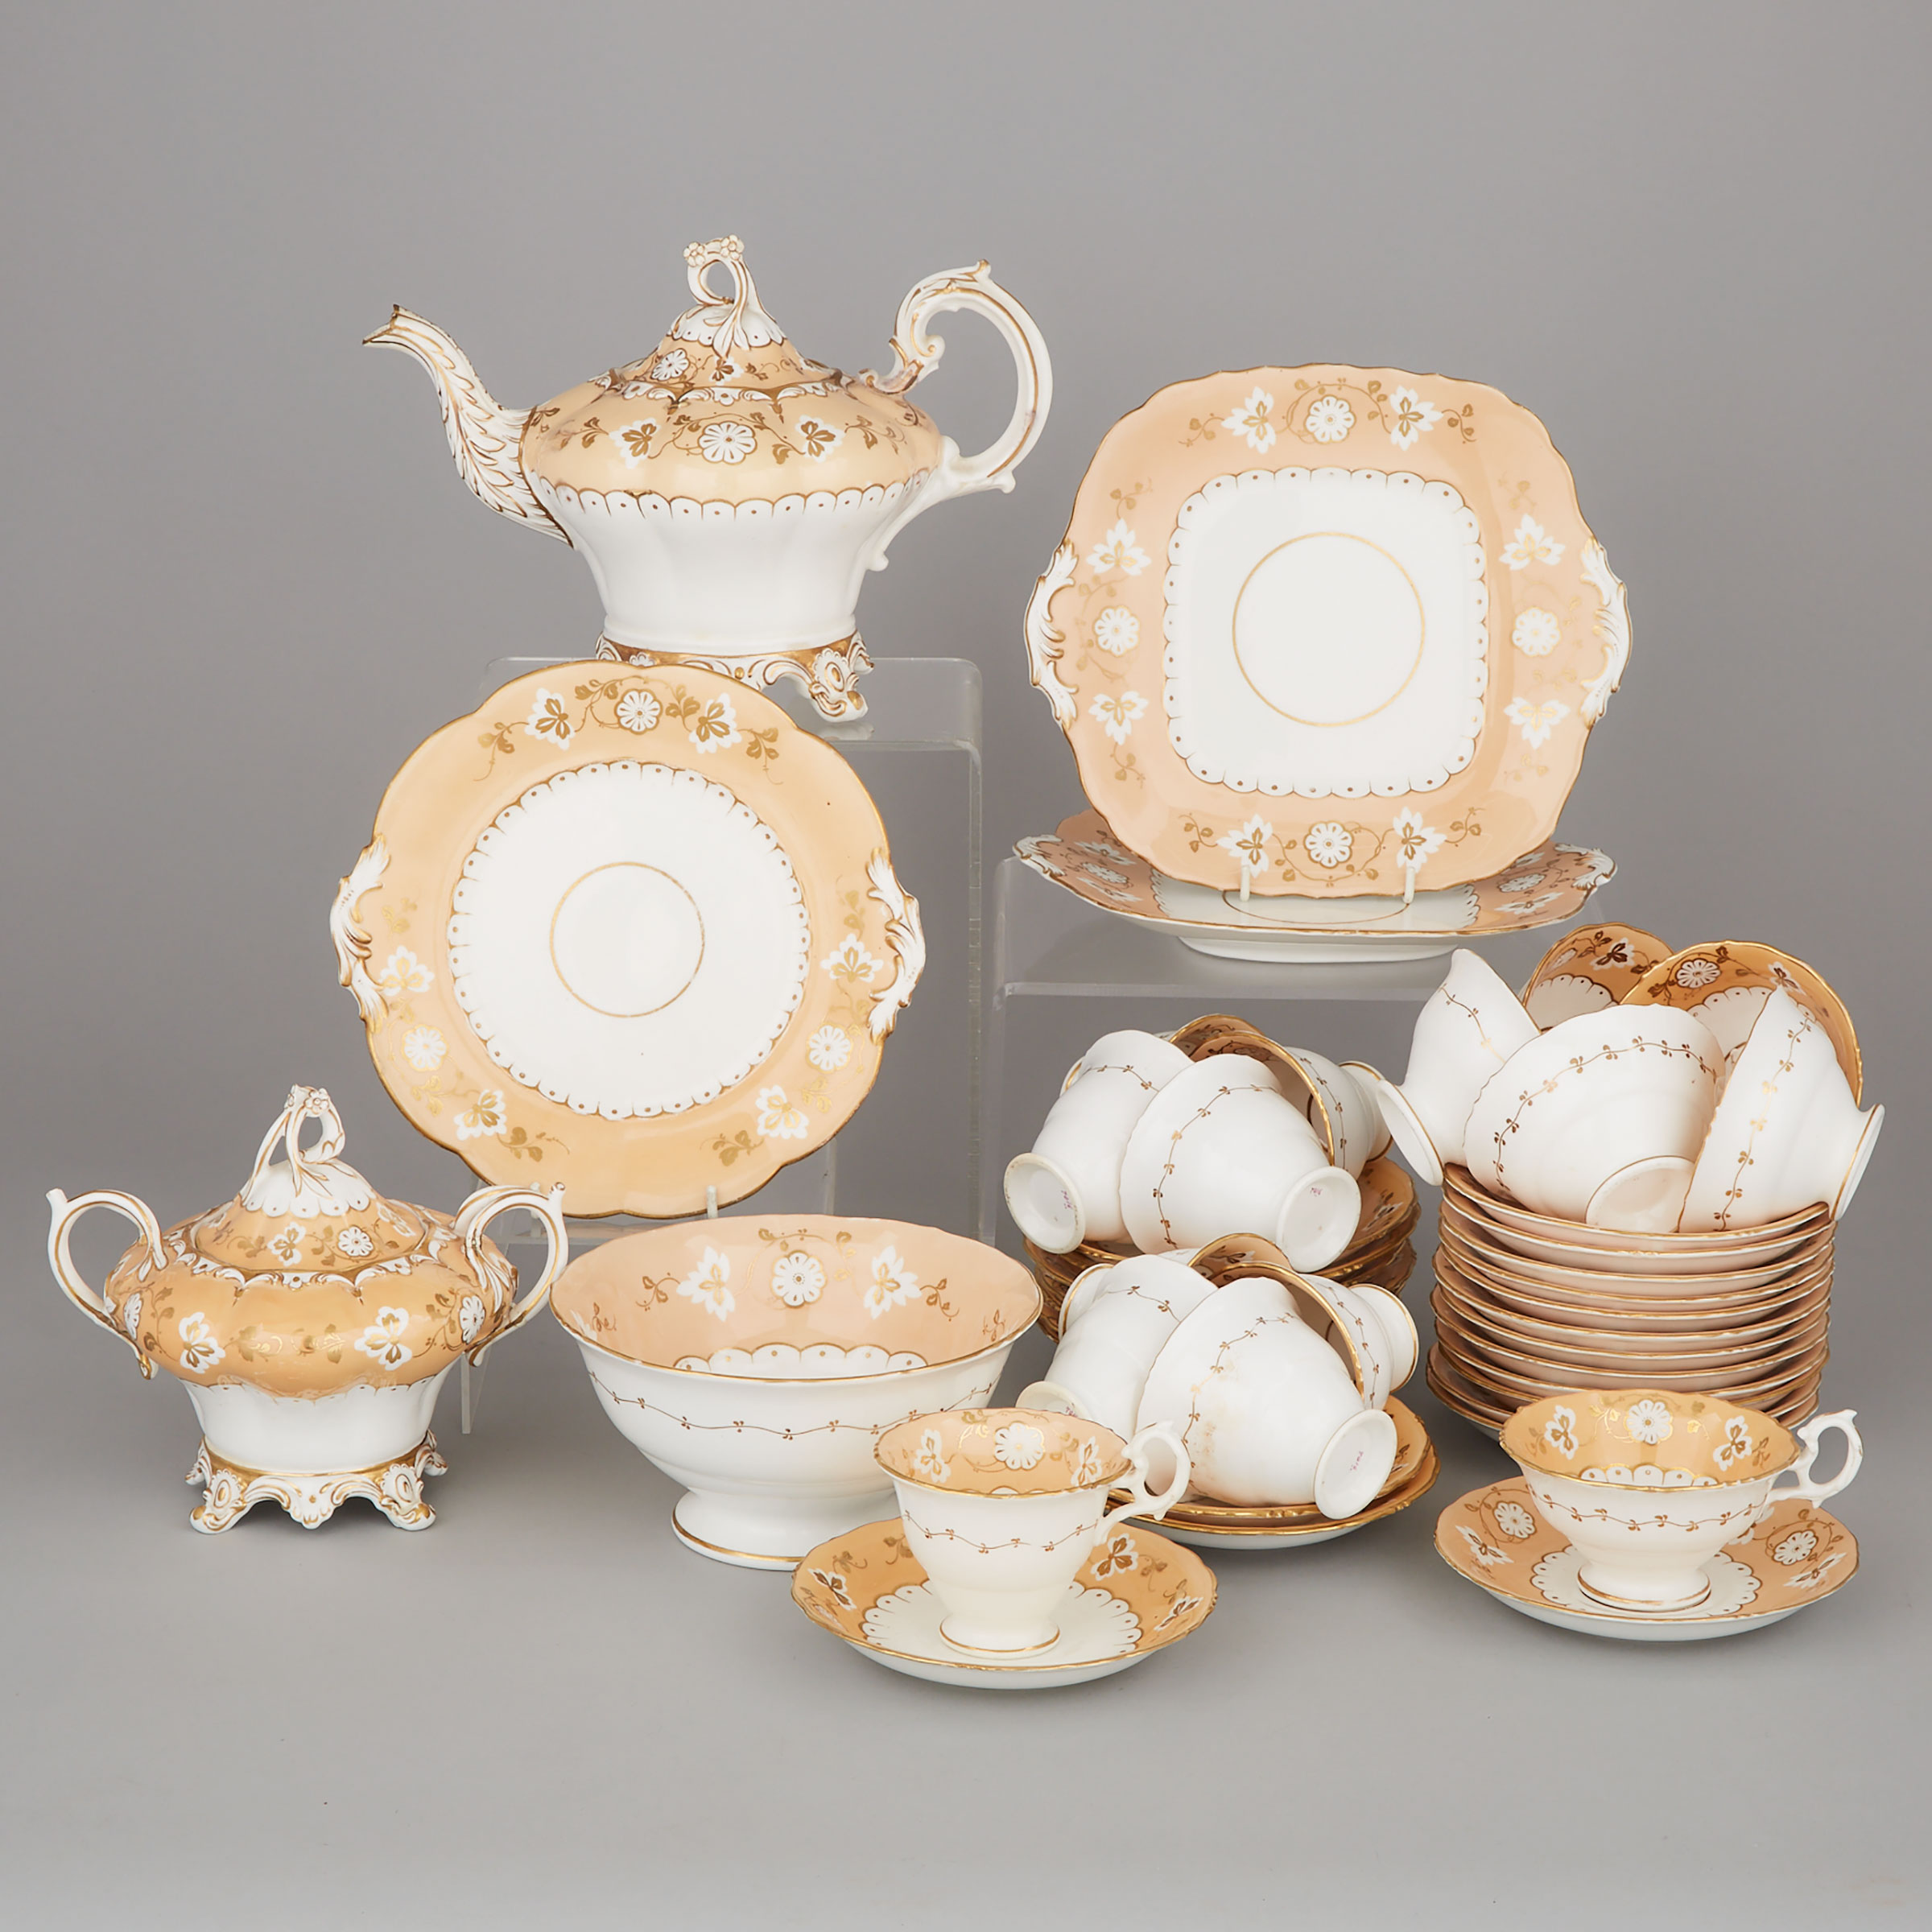 English Porcelain Apricot and Gilt Decorated Part Tea Service, mid-19th century